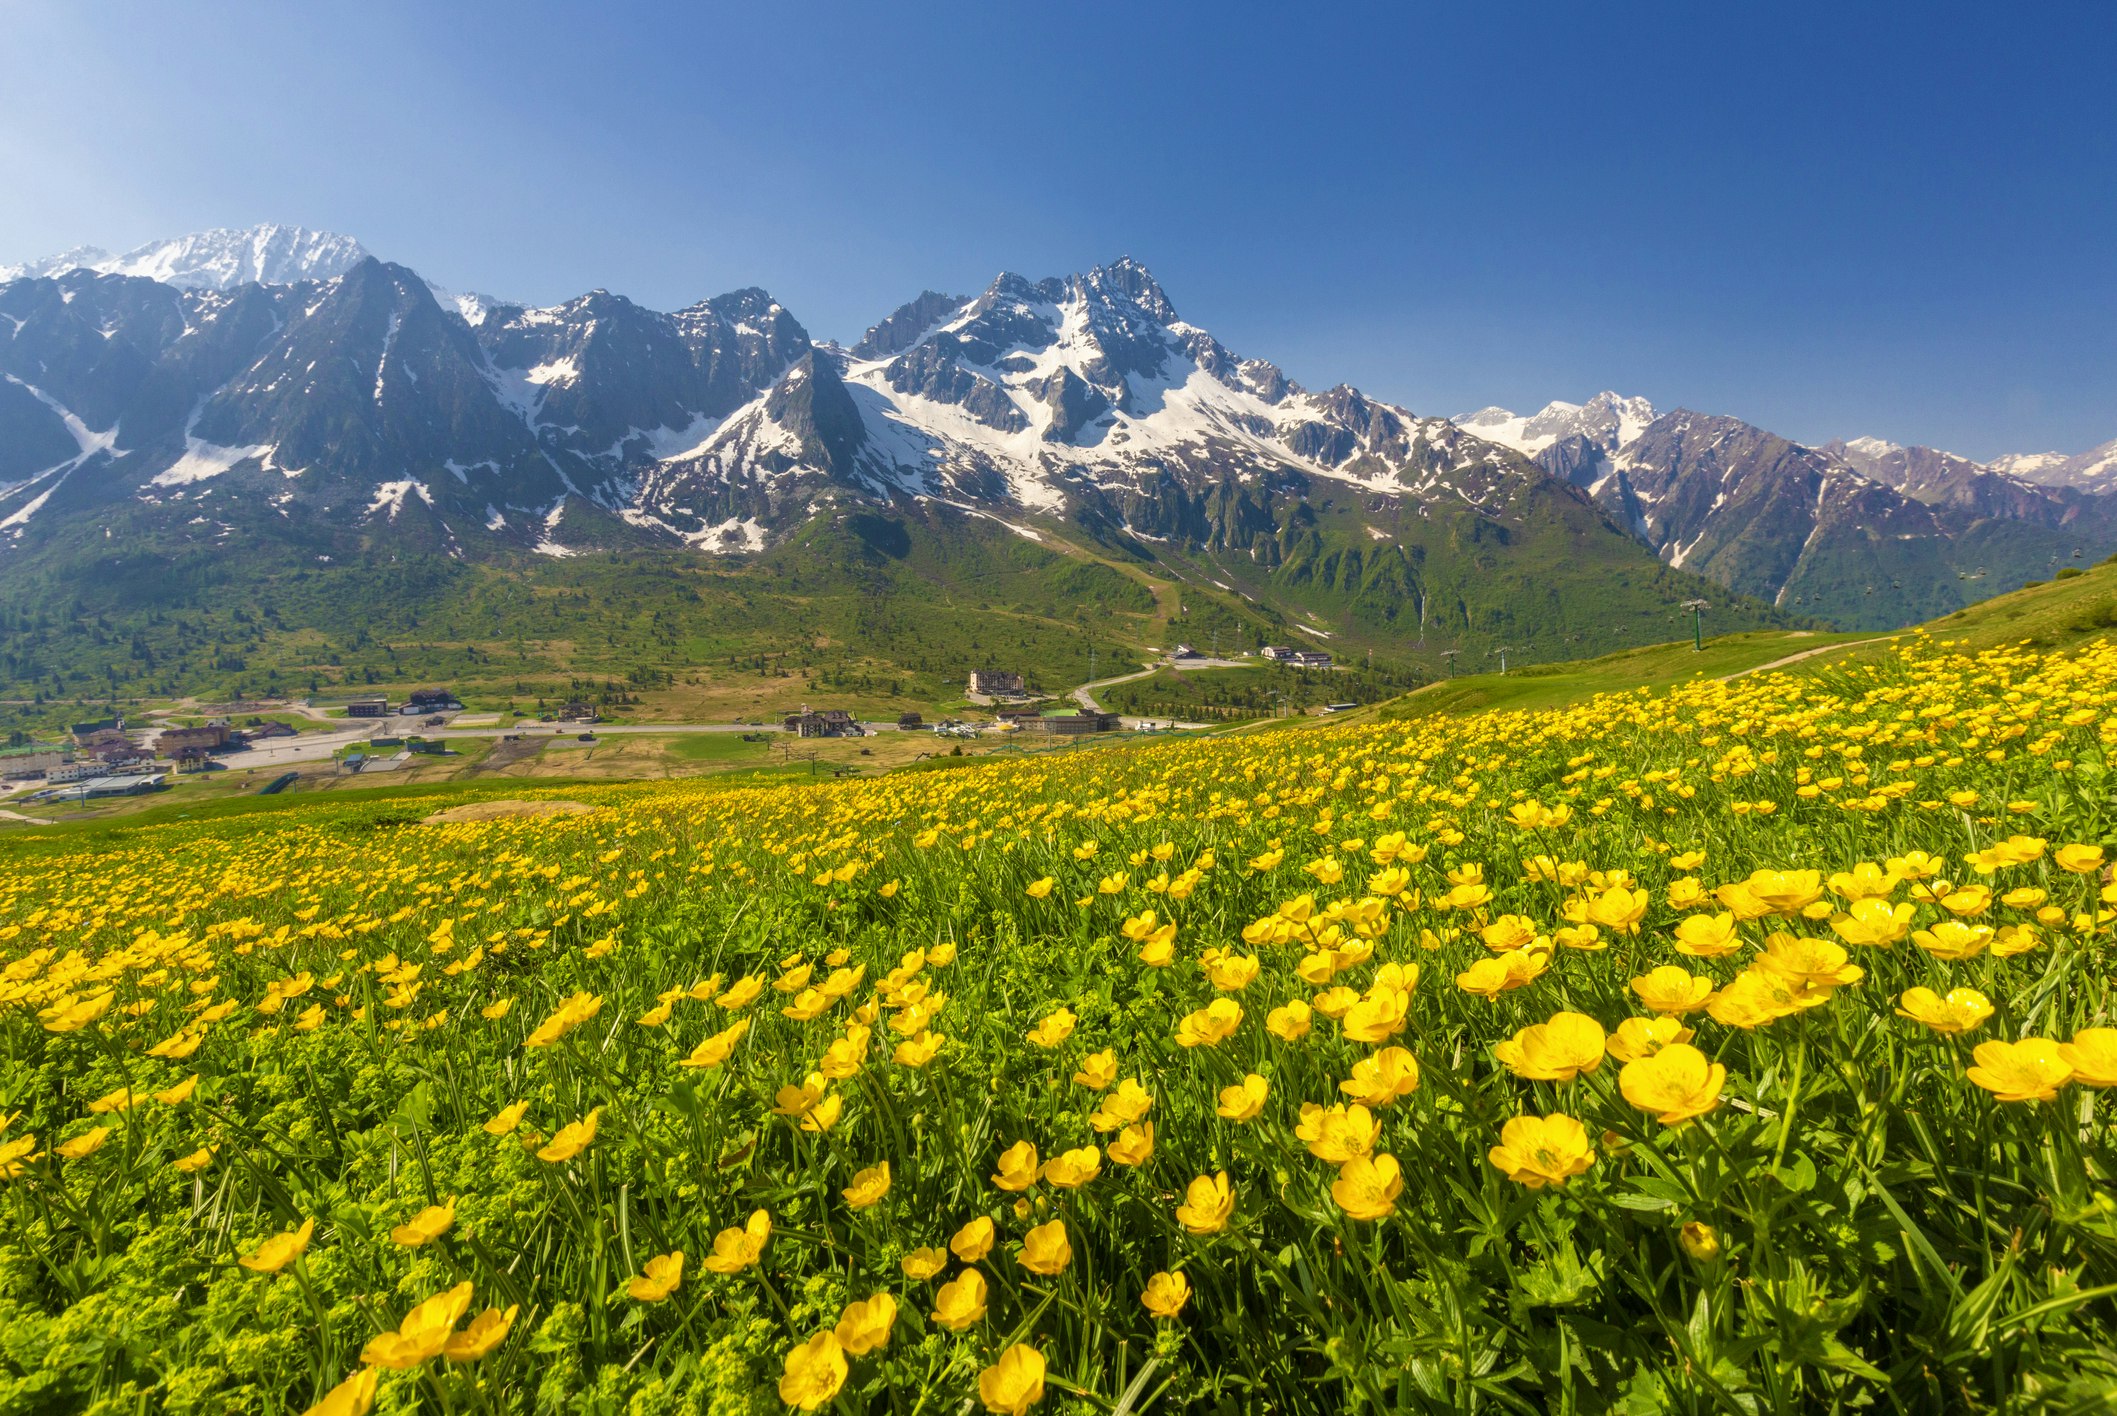 A mountain valley dotted with yellow flowers